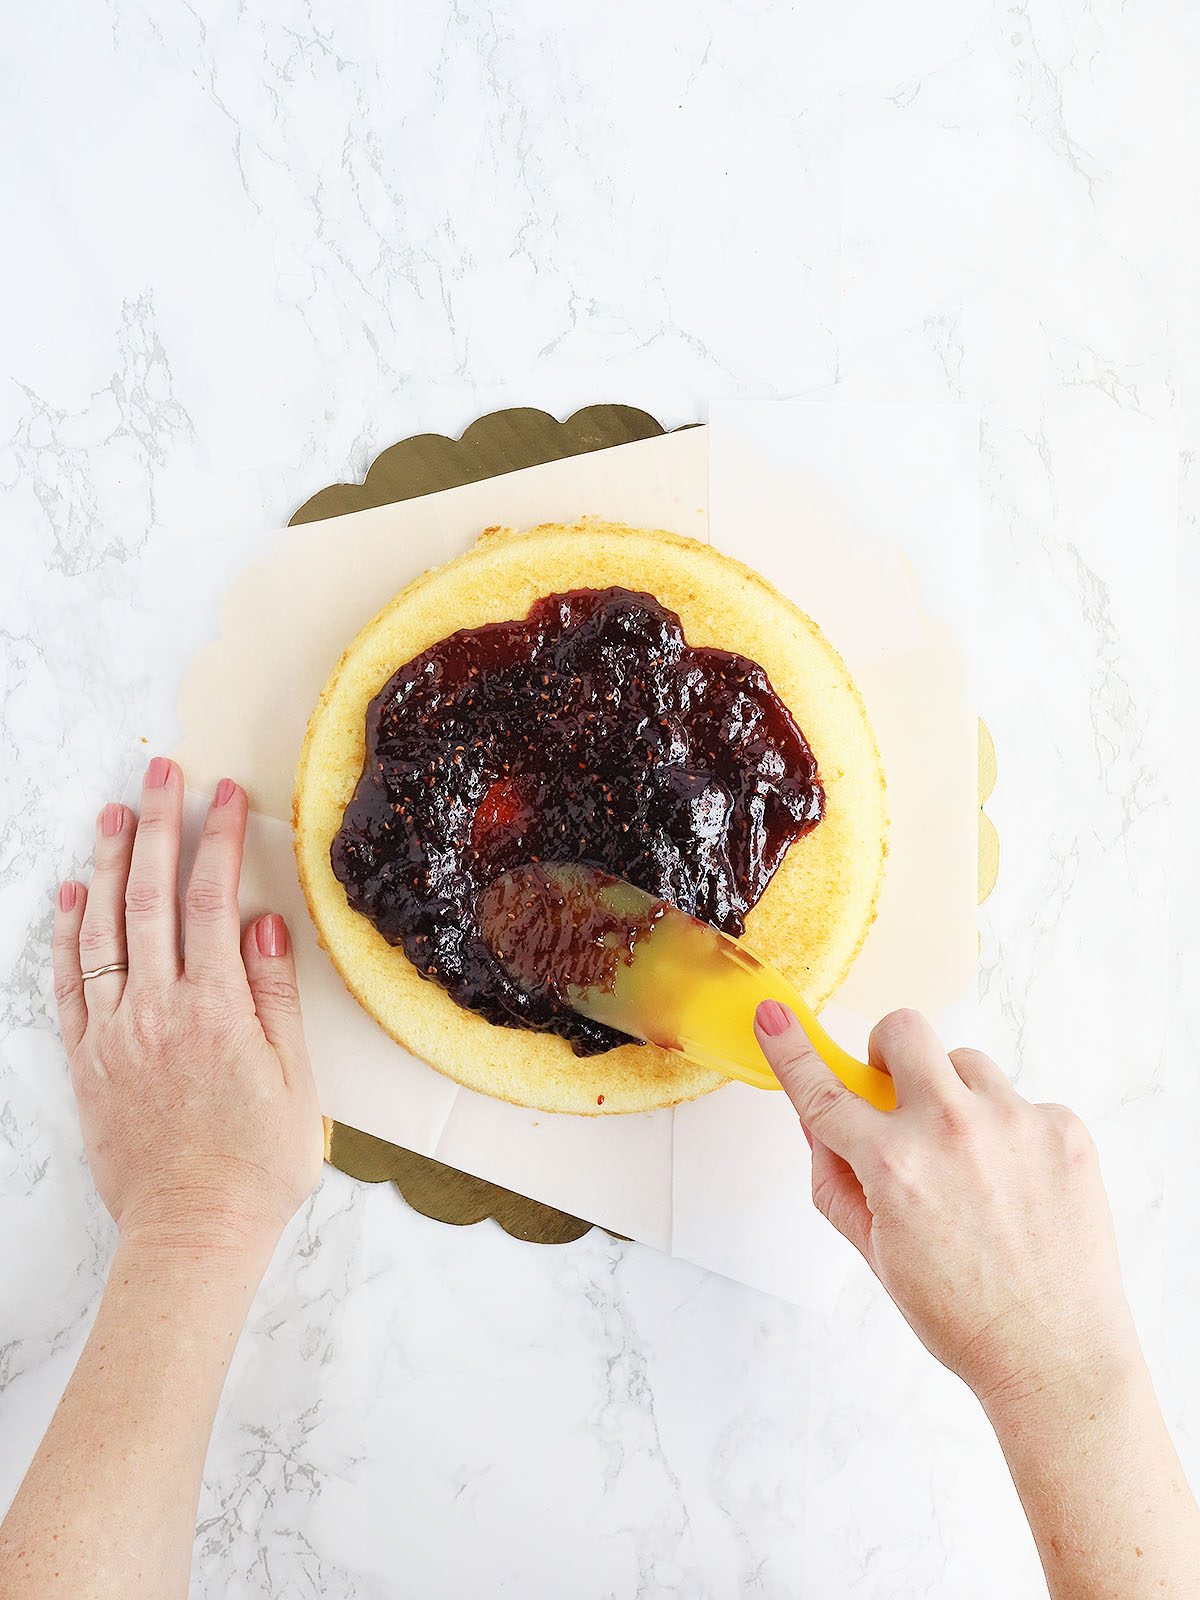 hands using a wide spatula to spread raspberry preserves over the top of one cake layer